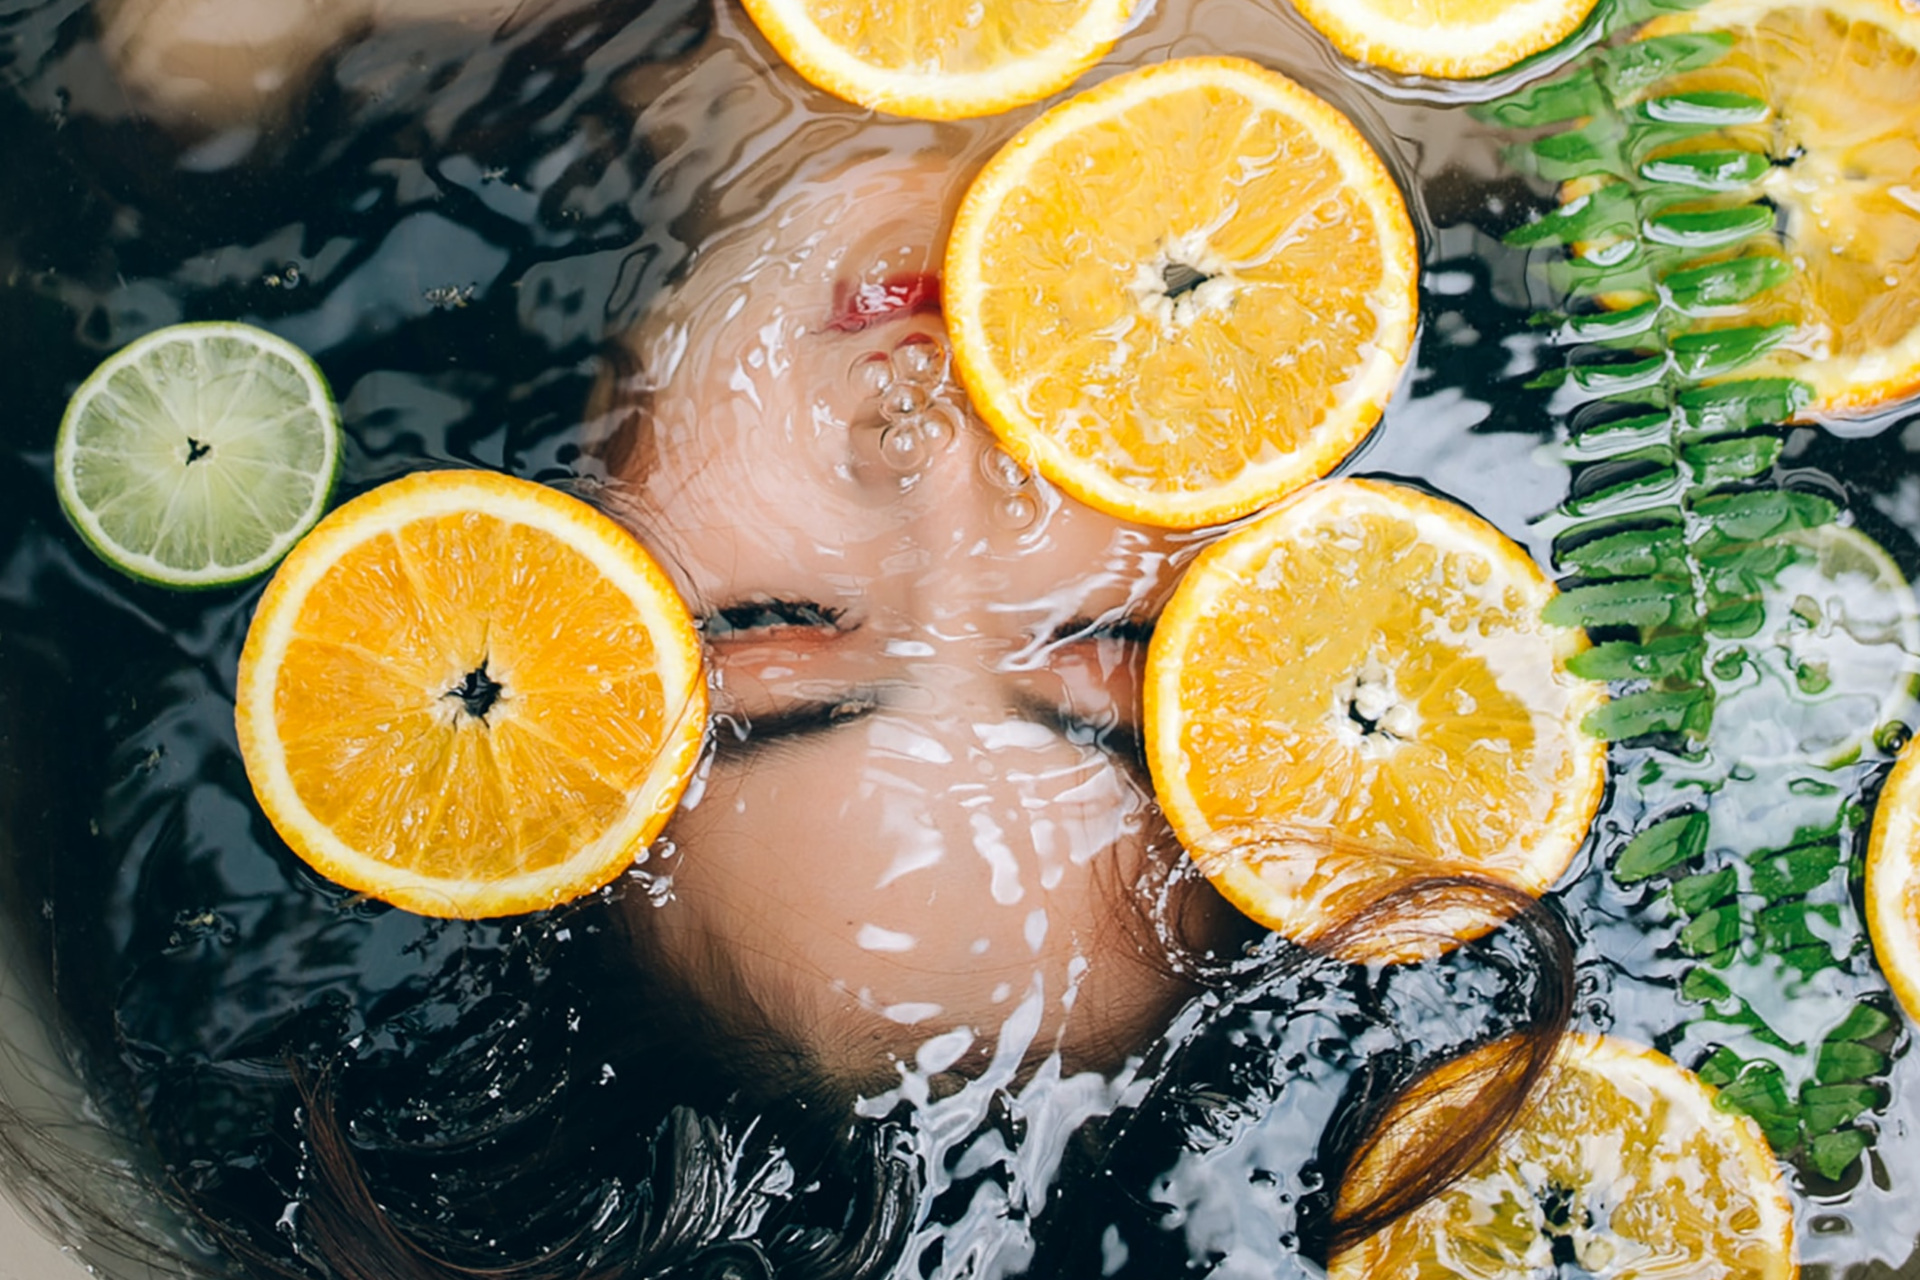 Woman in water with orange slices floating above her face